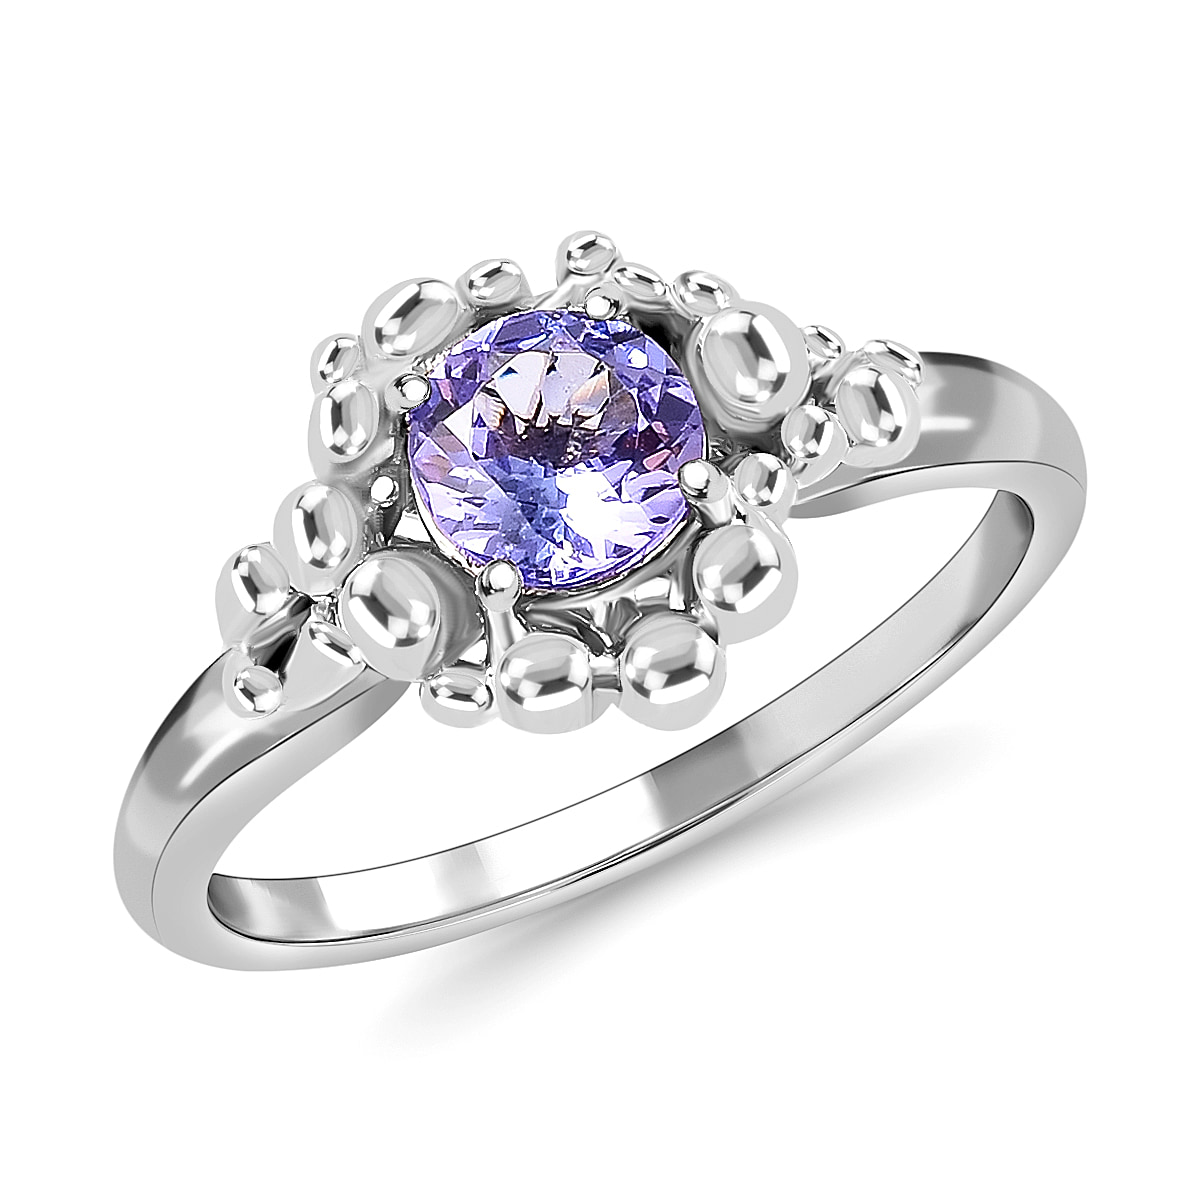 Lucy Q Bubble Collection - Premium Tanzanite Ring in Rhodium Overlay Sterling Silver